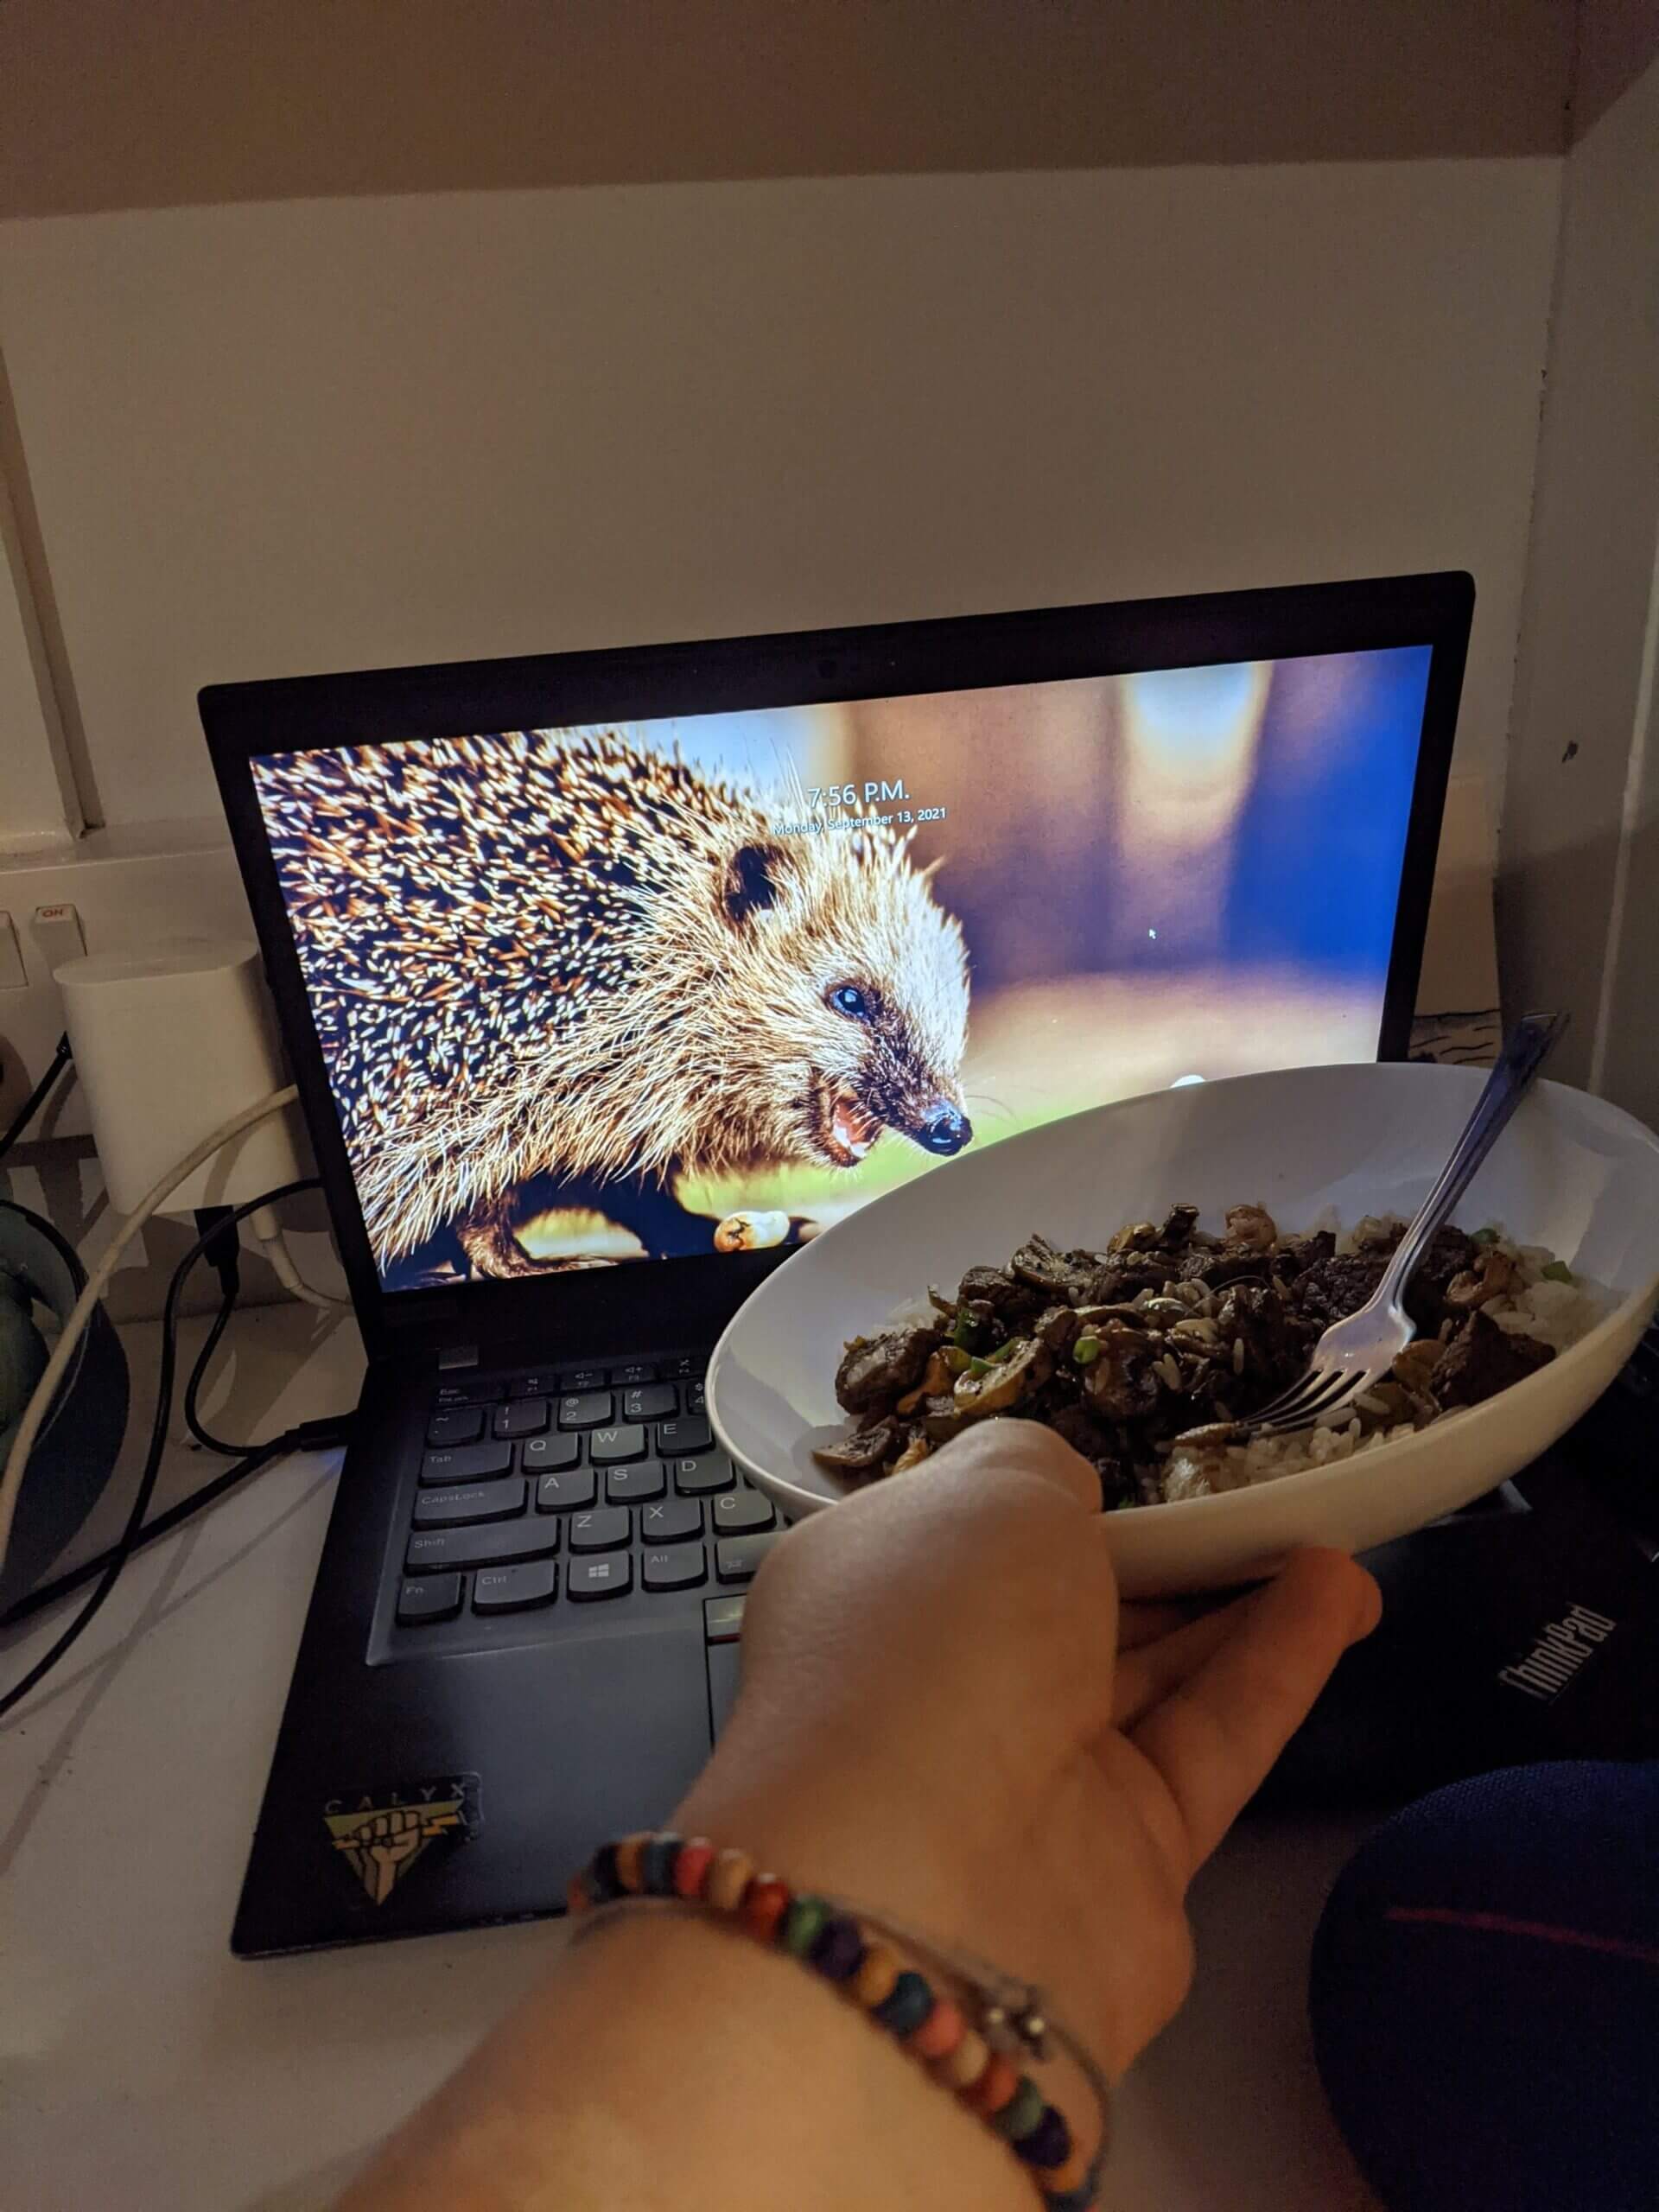 A plate of food being held in front of a photograph of a hungry and naughty
looking hedgehog